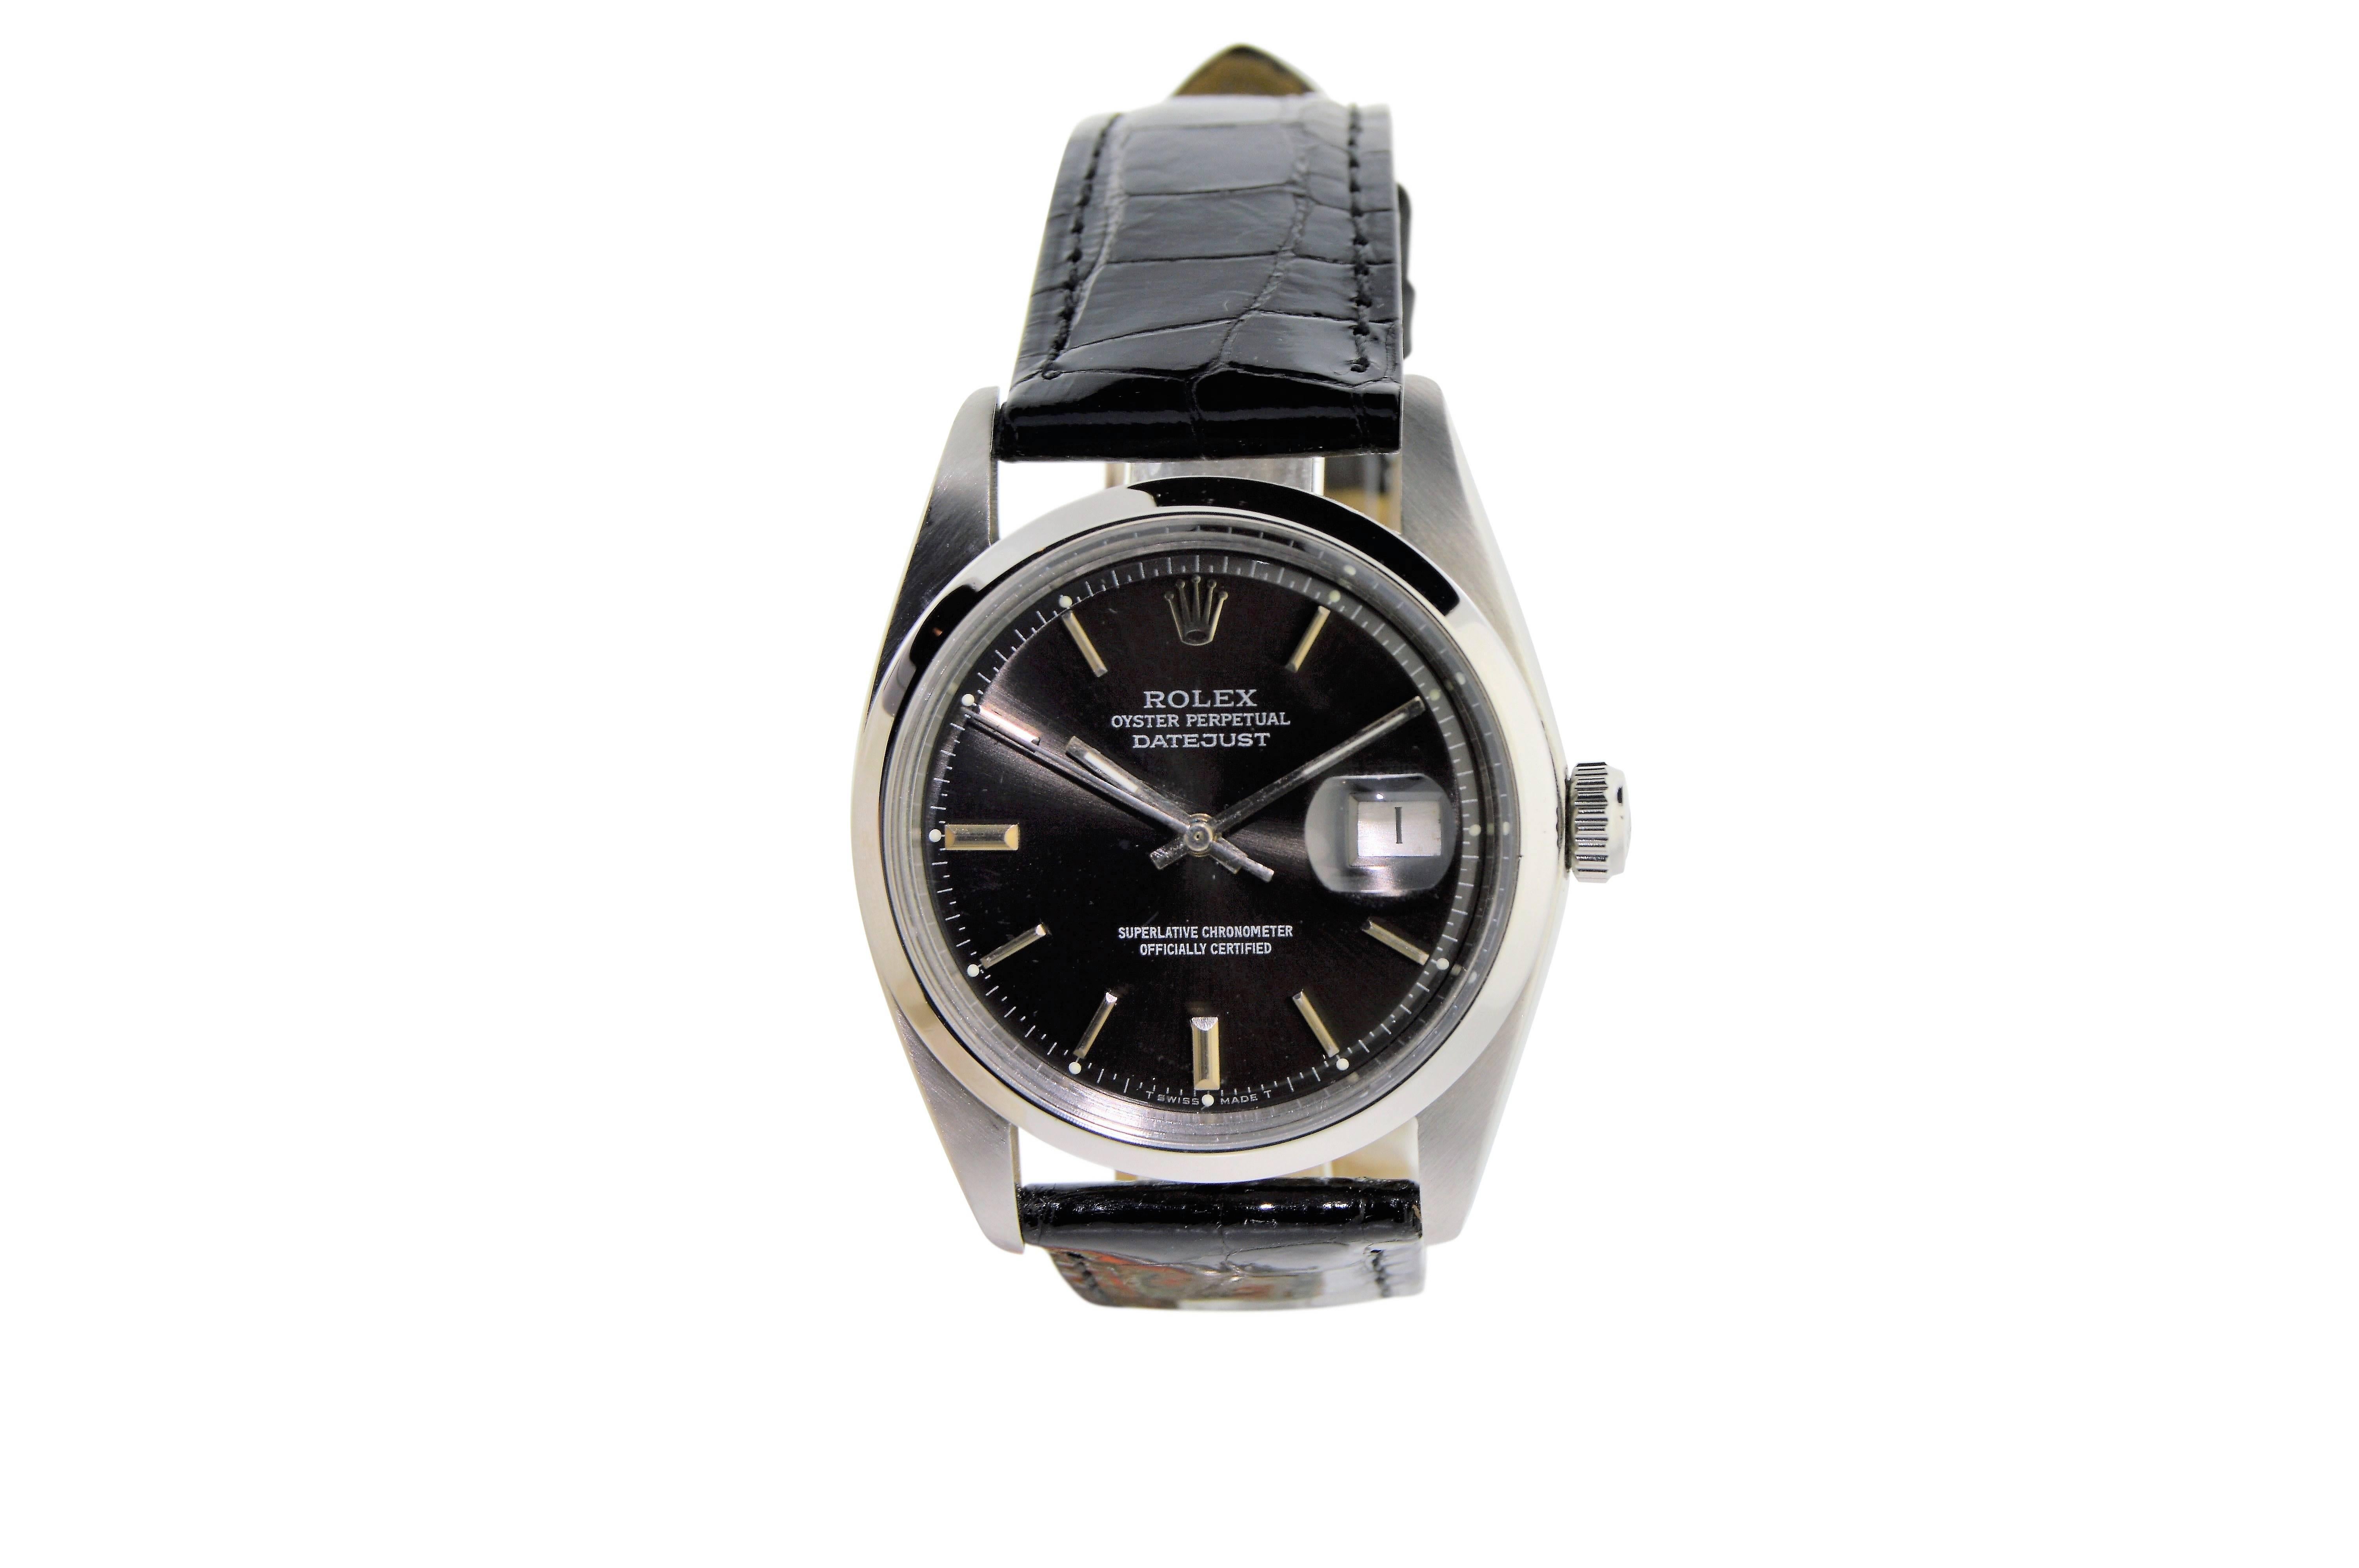 FACTORY / HOUSE: Rolex Watch Company
STYLE / REFERENCE: Datejust / 1603
CIRCA: 1971 / 1972
MOVEMENT / CALIBER: Perpetual Winding / 26 Jewels / Cal. 1570
DIAL / HANDS: Original Charcoal / Baton Hands
DIMENSIONS: 43mm X 36mm
ATTACHMENT / LENGTH: 20mm